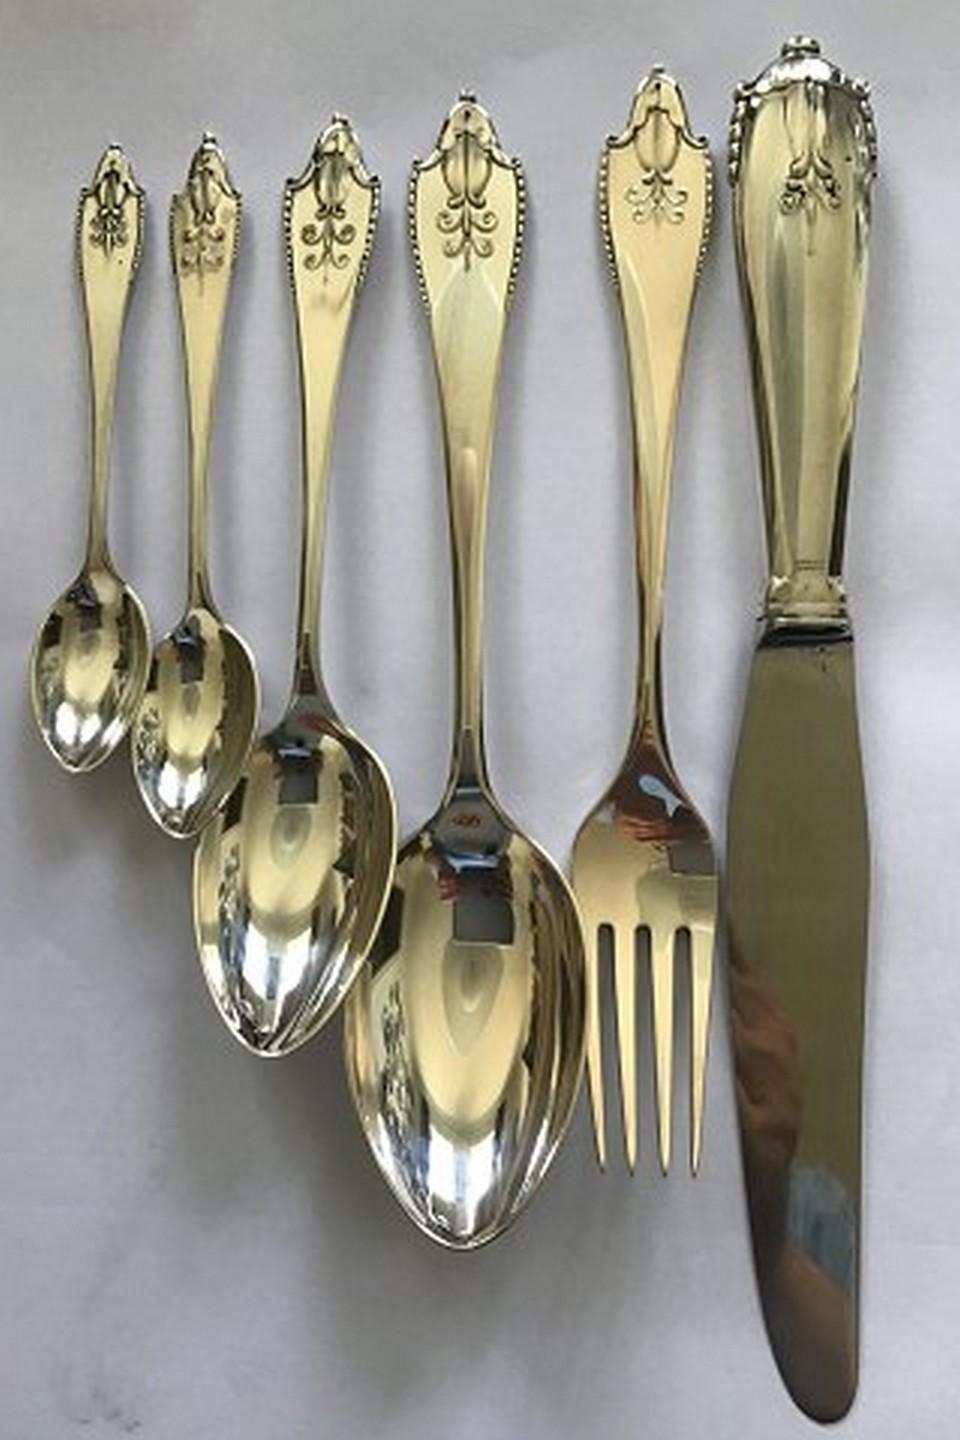 Georg Jensen silver/sterling silver Akkeleje set for 12 people (72 pieces).

Set consists of
12 x dinner knives, L 25 cm(9 27/32 in)
12 x dinner forks, L 19.8 cm(7 51/64 in)
12 x dinner spoons, L 20.2 cm(7 61/64 in)
12 x dessert spoons, L 17